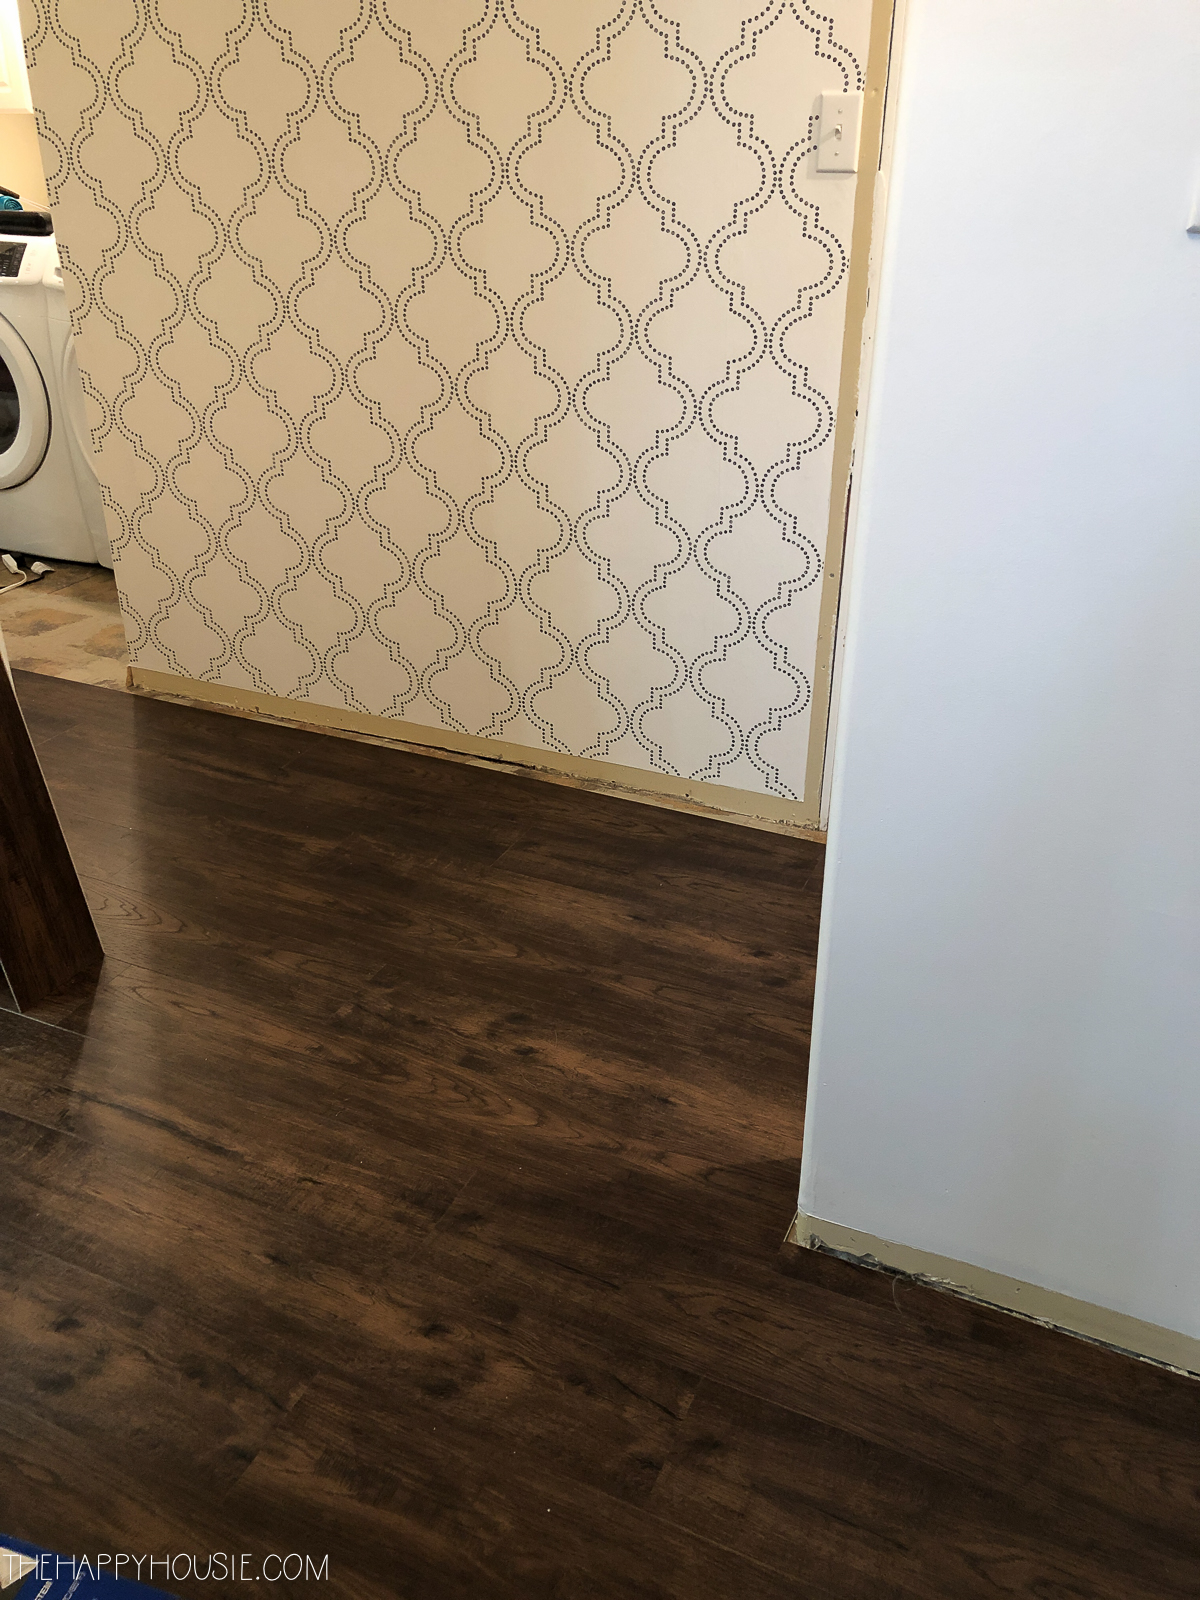 The flooring in with a wooden look.